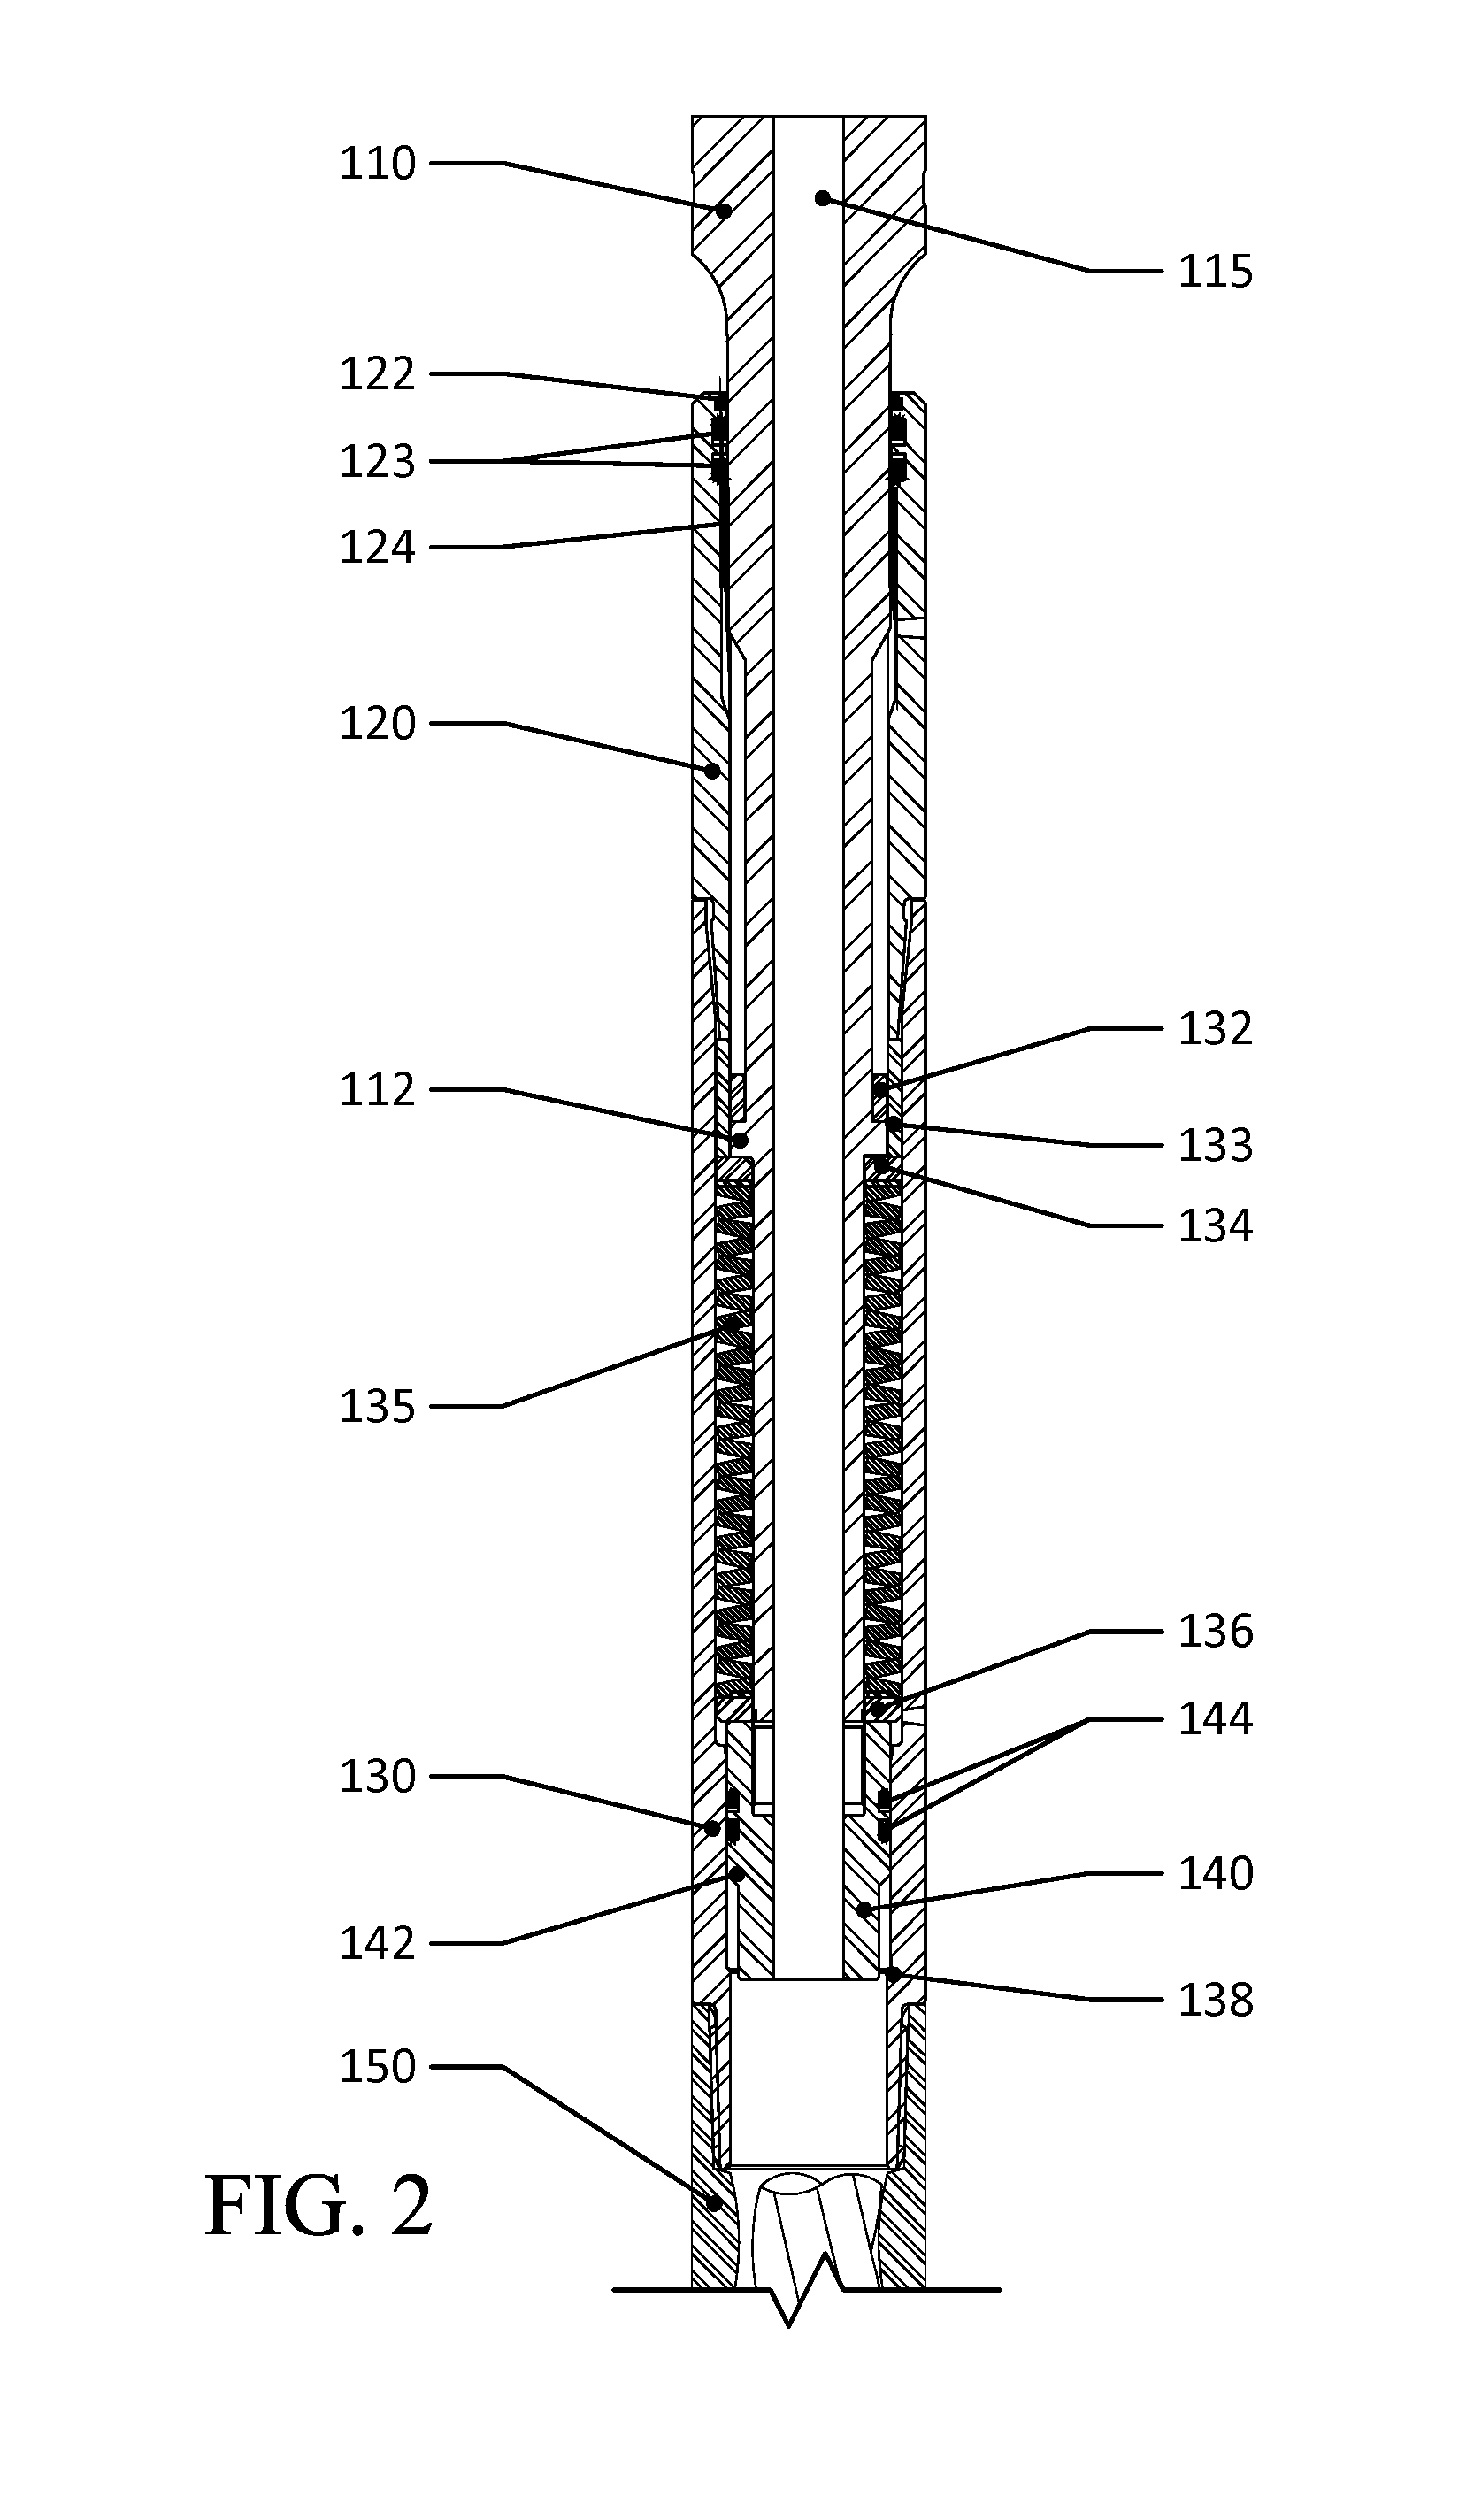 Flow controlling downhole tool